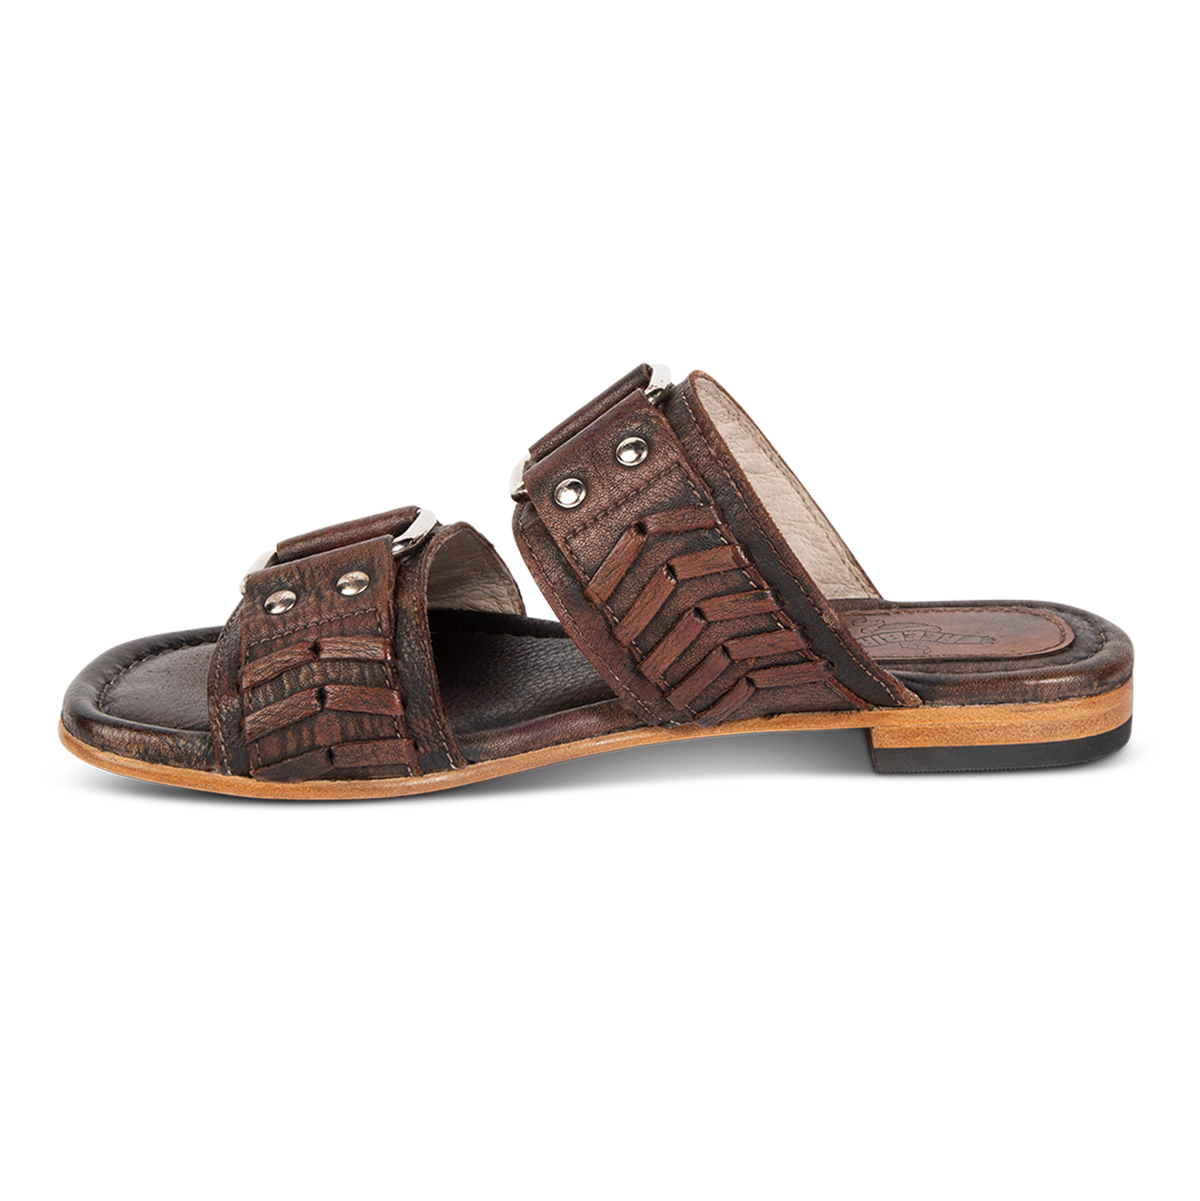 Inside view showing FREEBIRD woven leather detailed foot straps on women's Sage black low heeled slip-on sandal